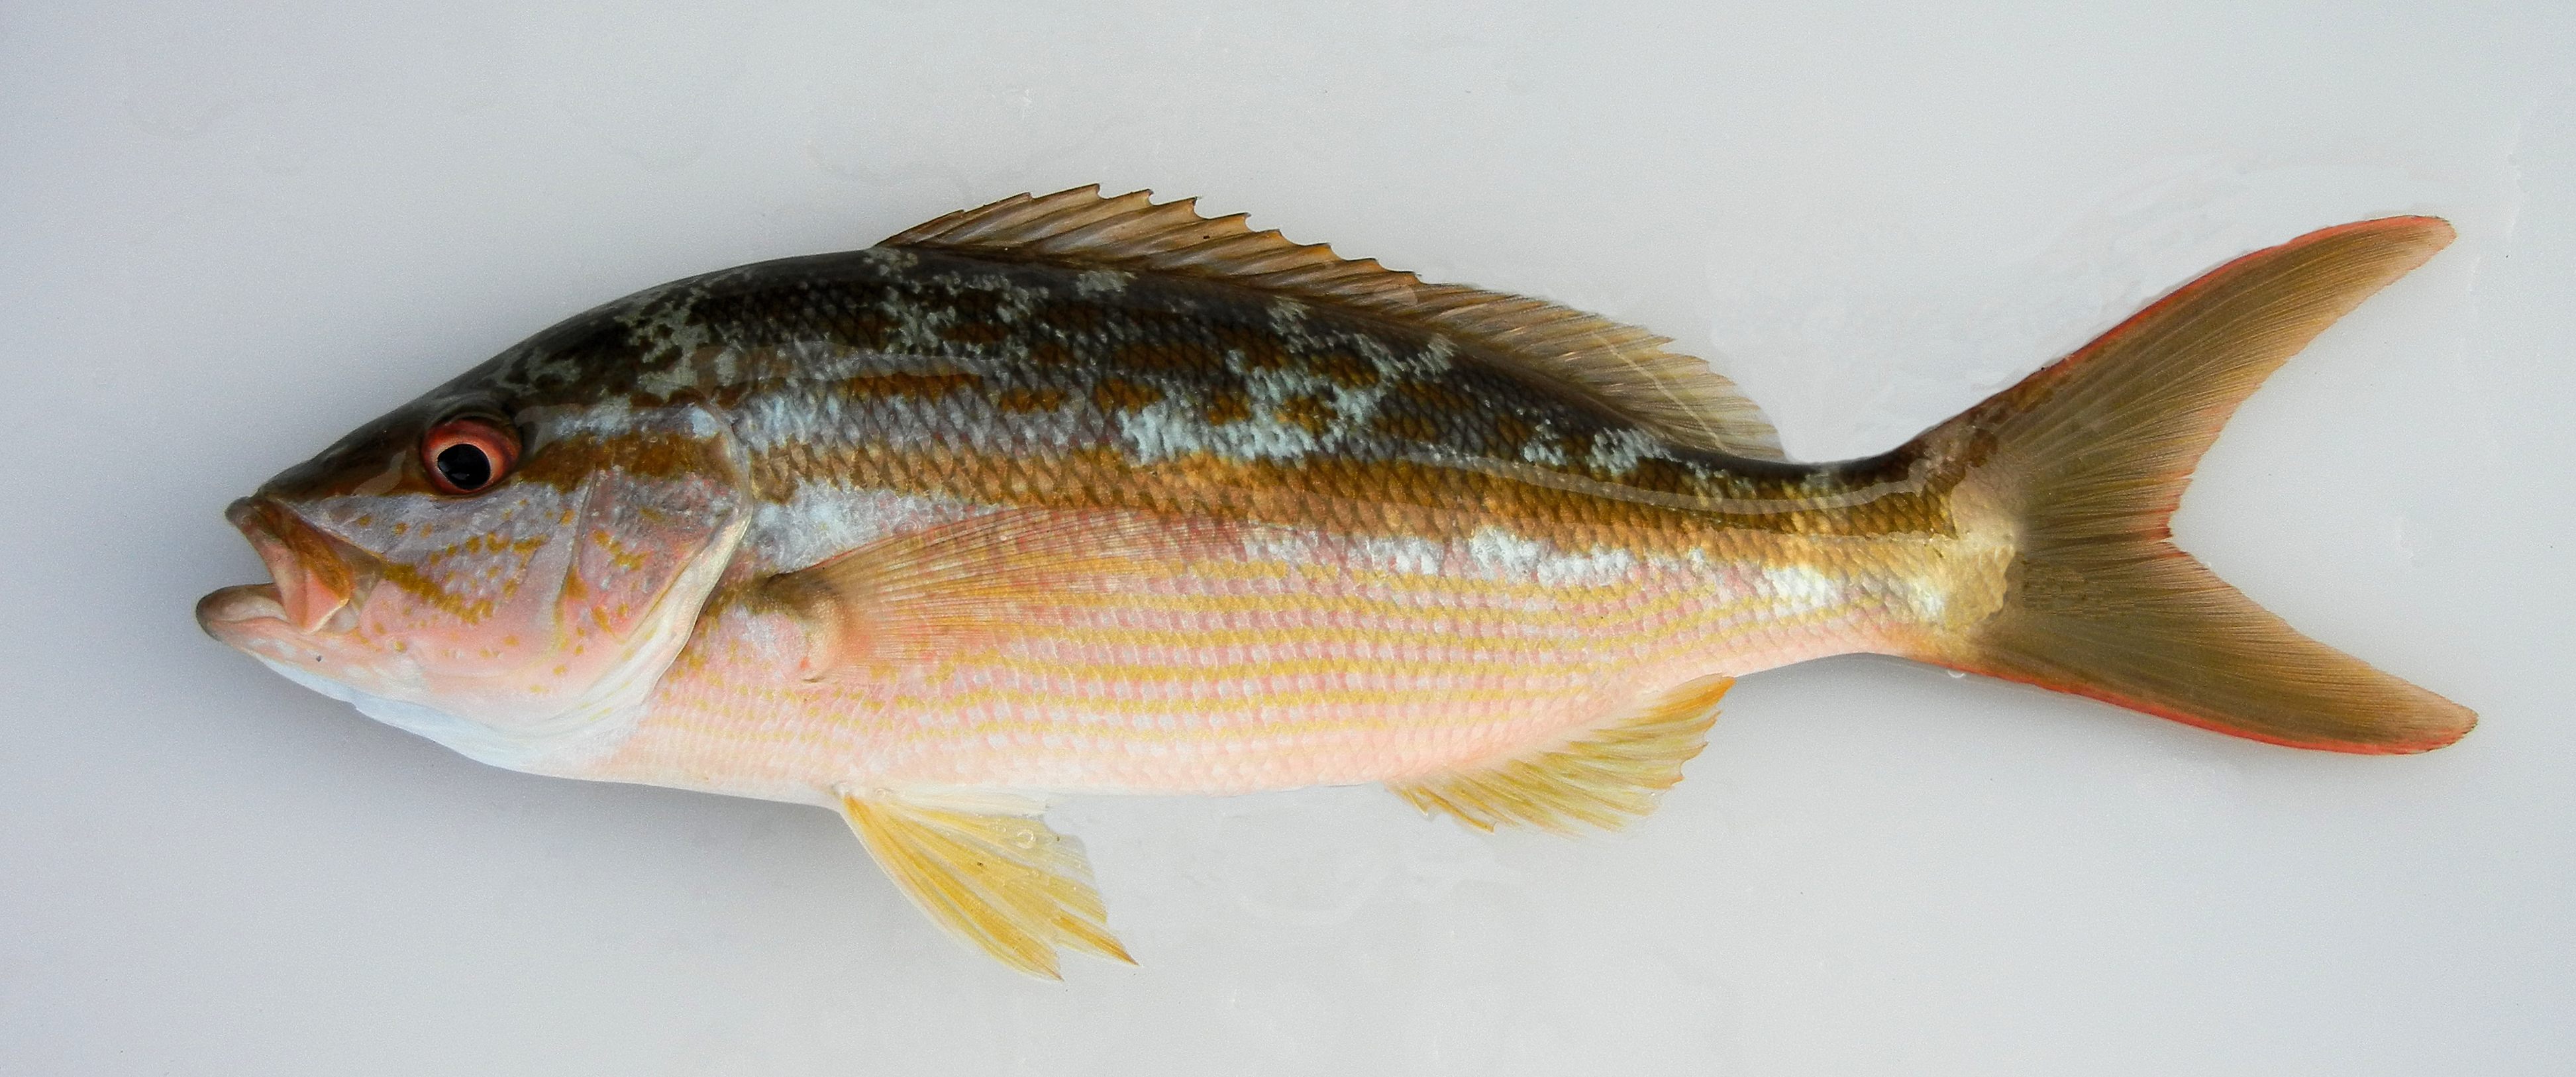 yellow tail snapper